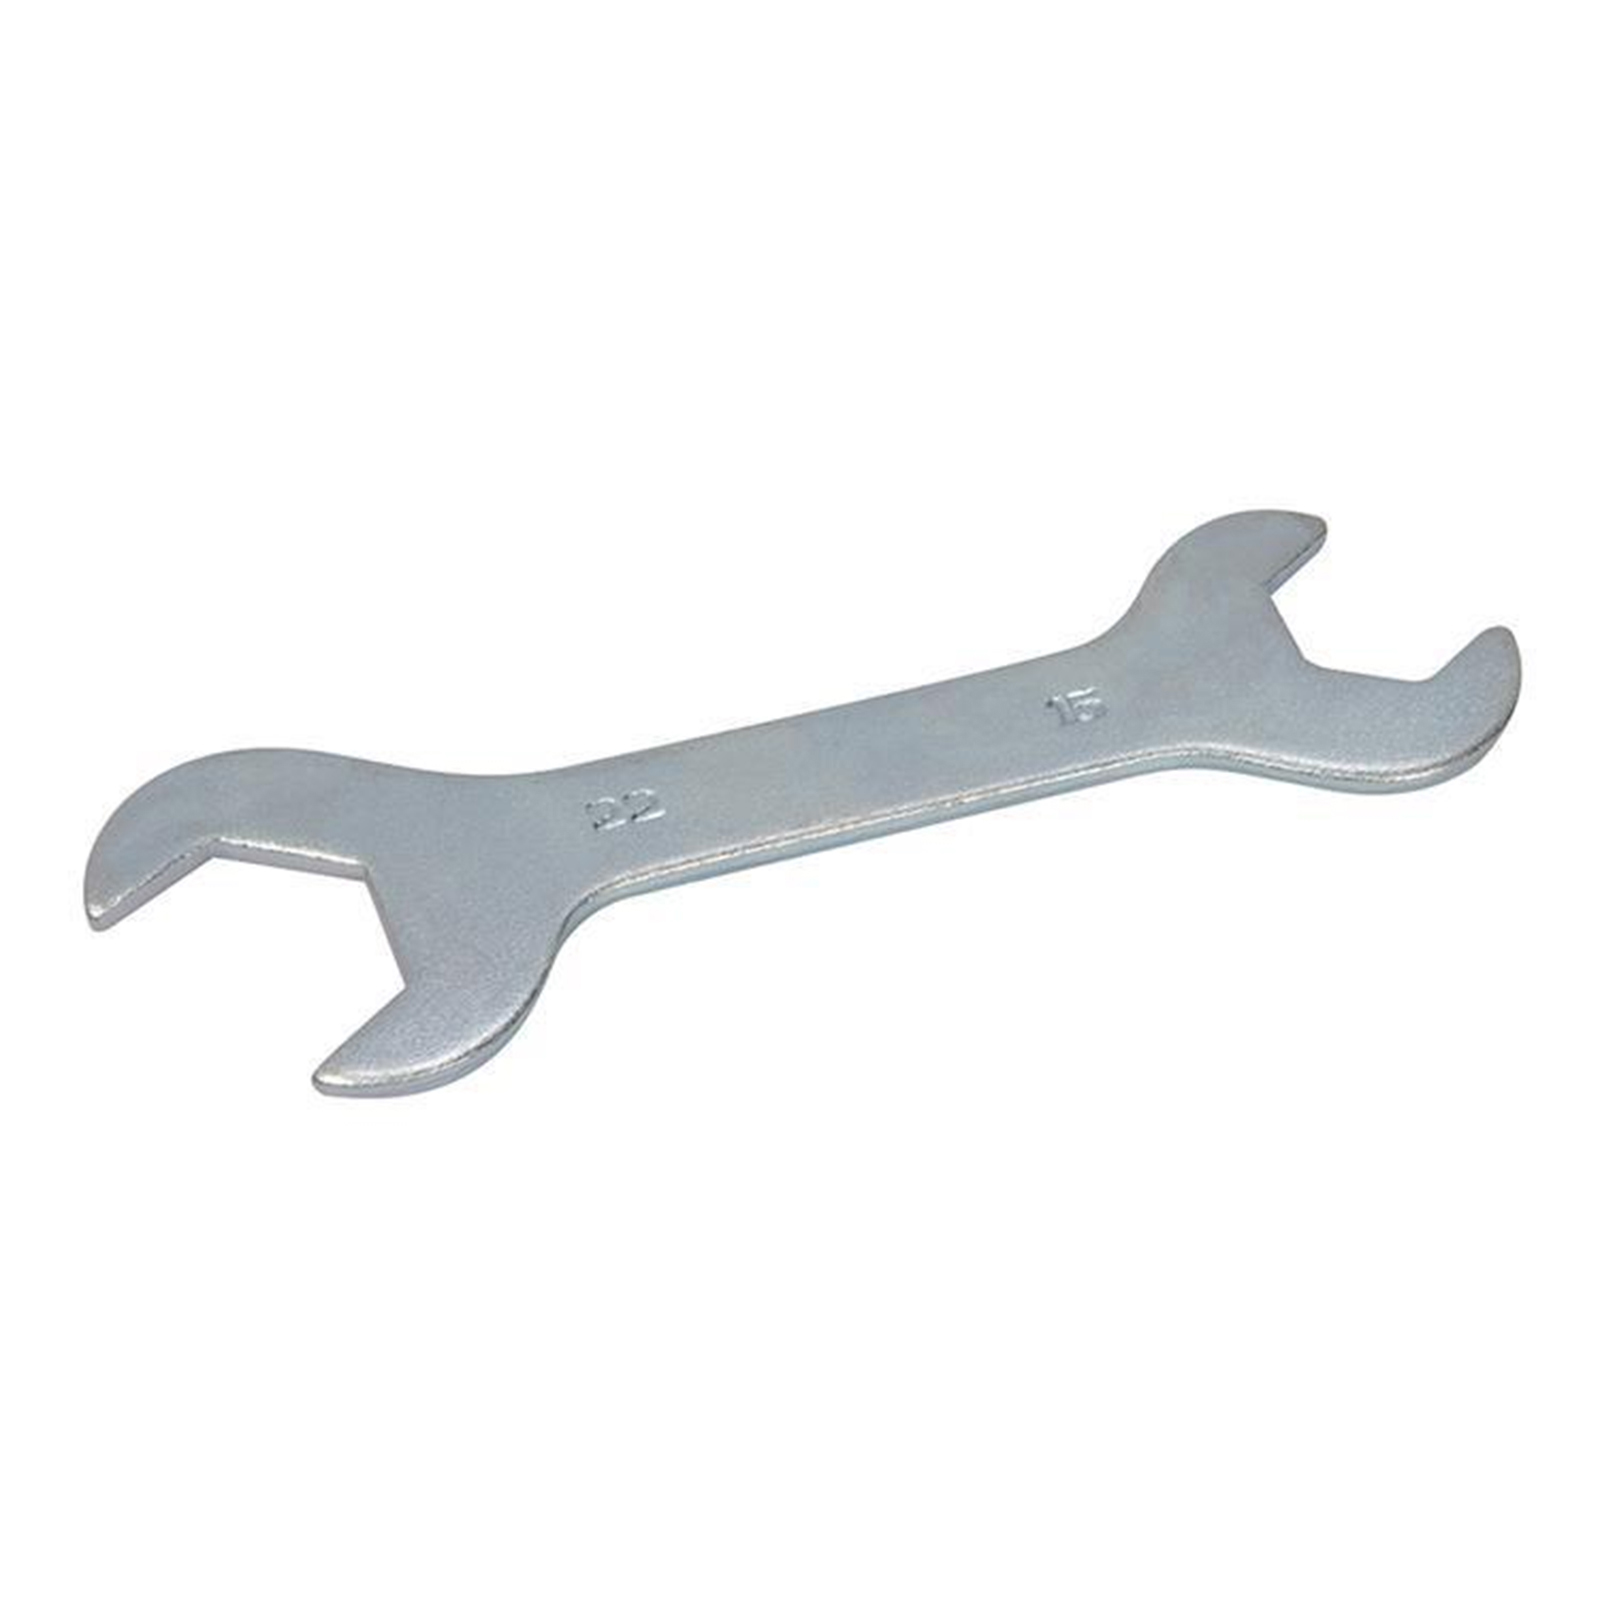 Plumbers Compression Fitting Spanner Tool for 15mm and 22mm Nuts 195710 